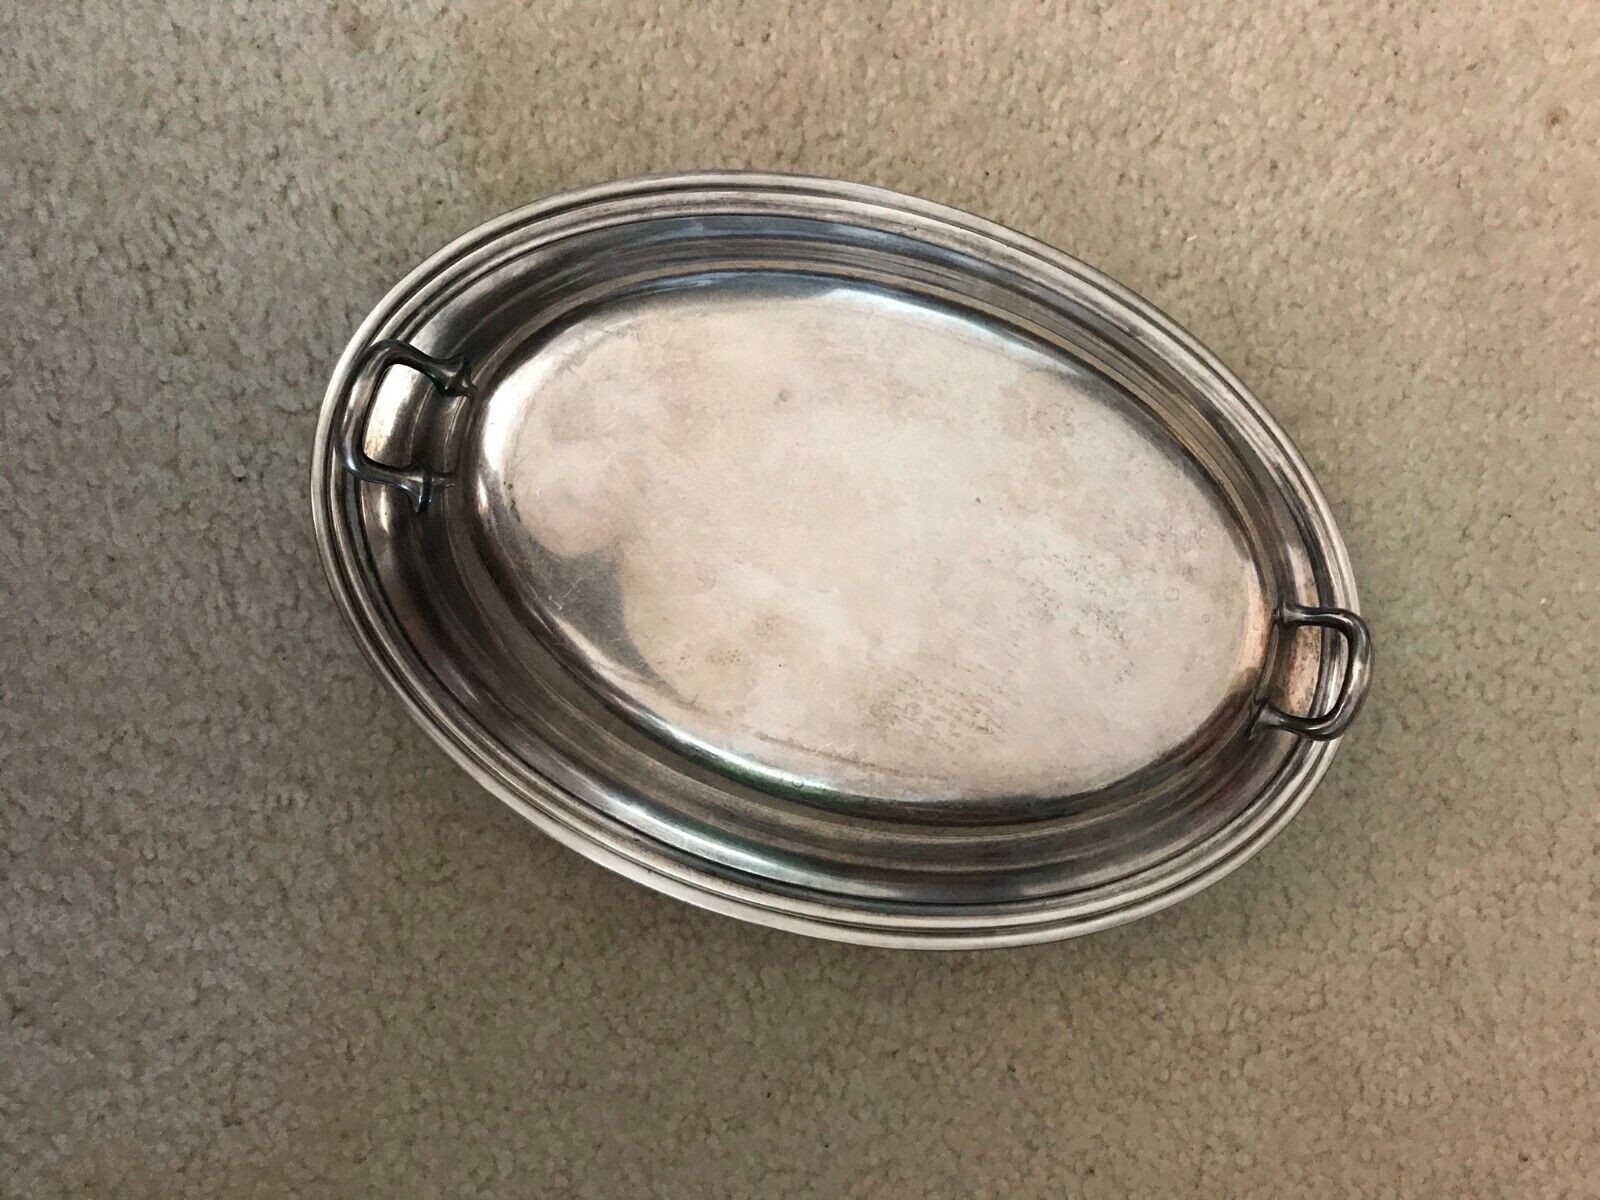 VTG marked Gorham Y426/3 Silver Plated Oval Serving Dish / Tray w/ cover